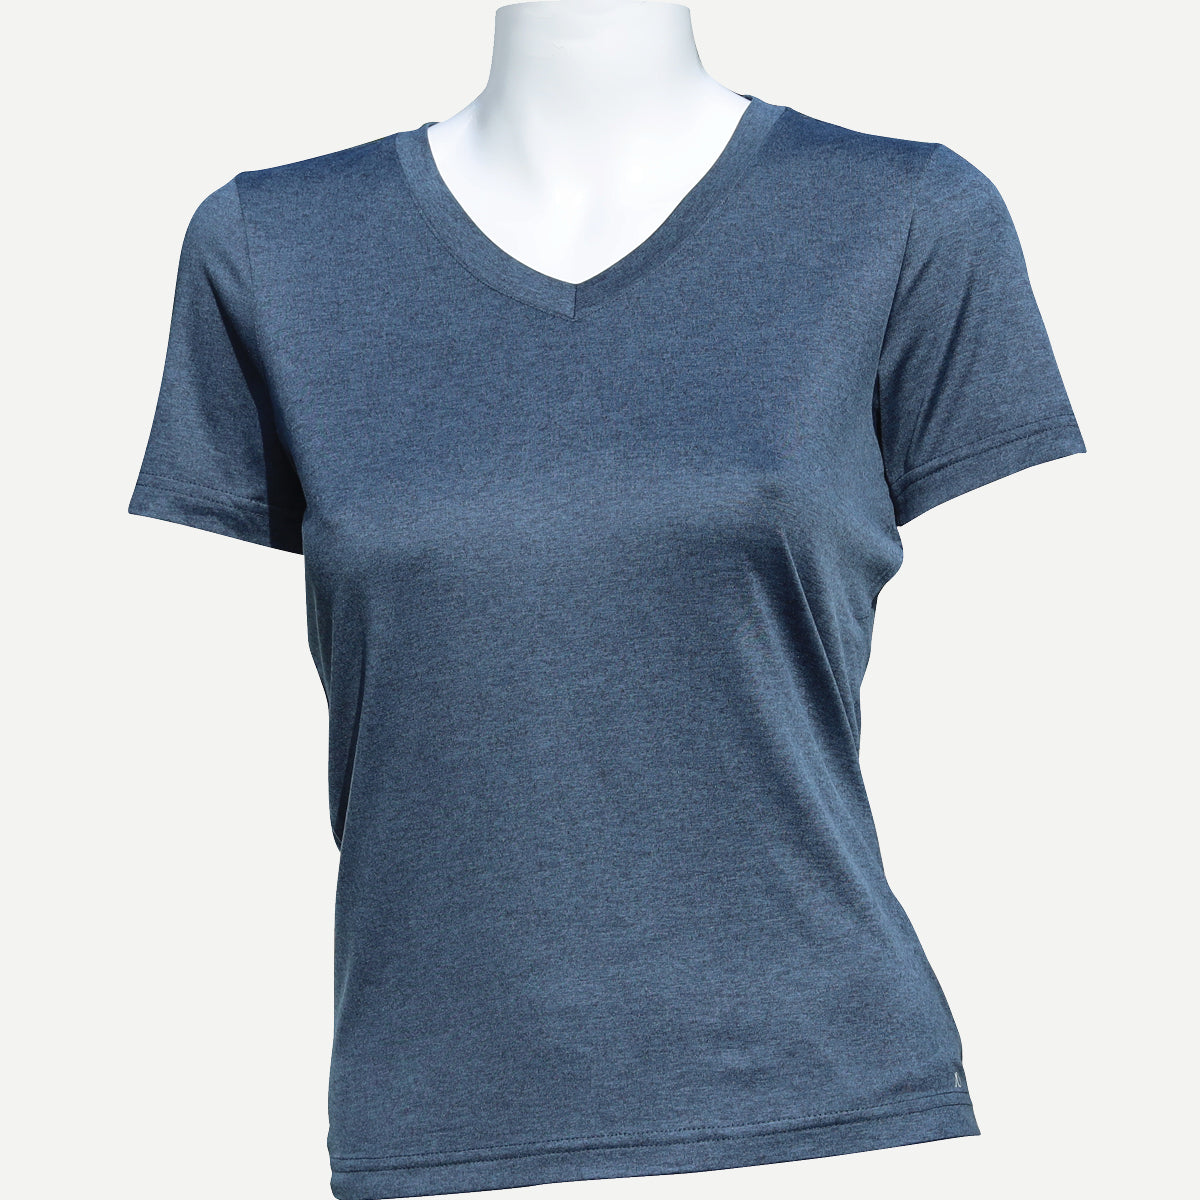 LADY BUTTER T - NAVY HEATHER